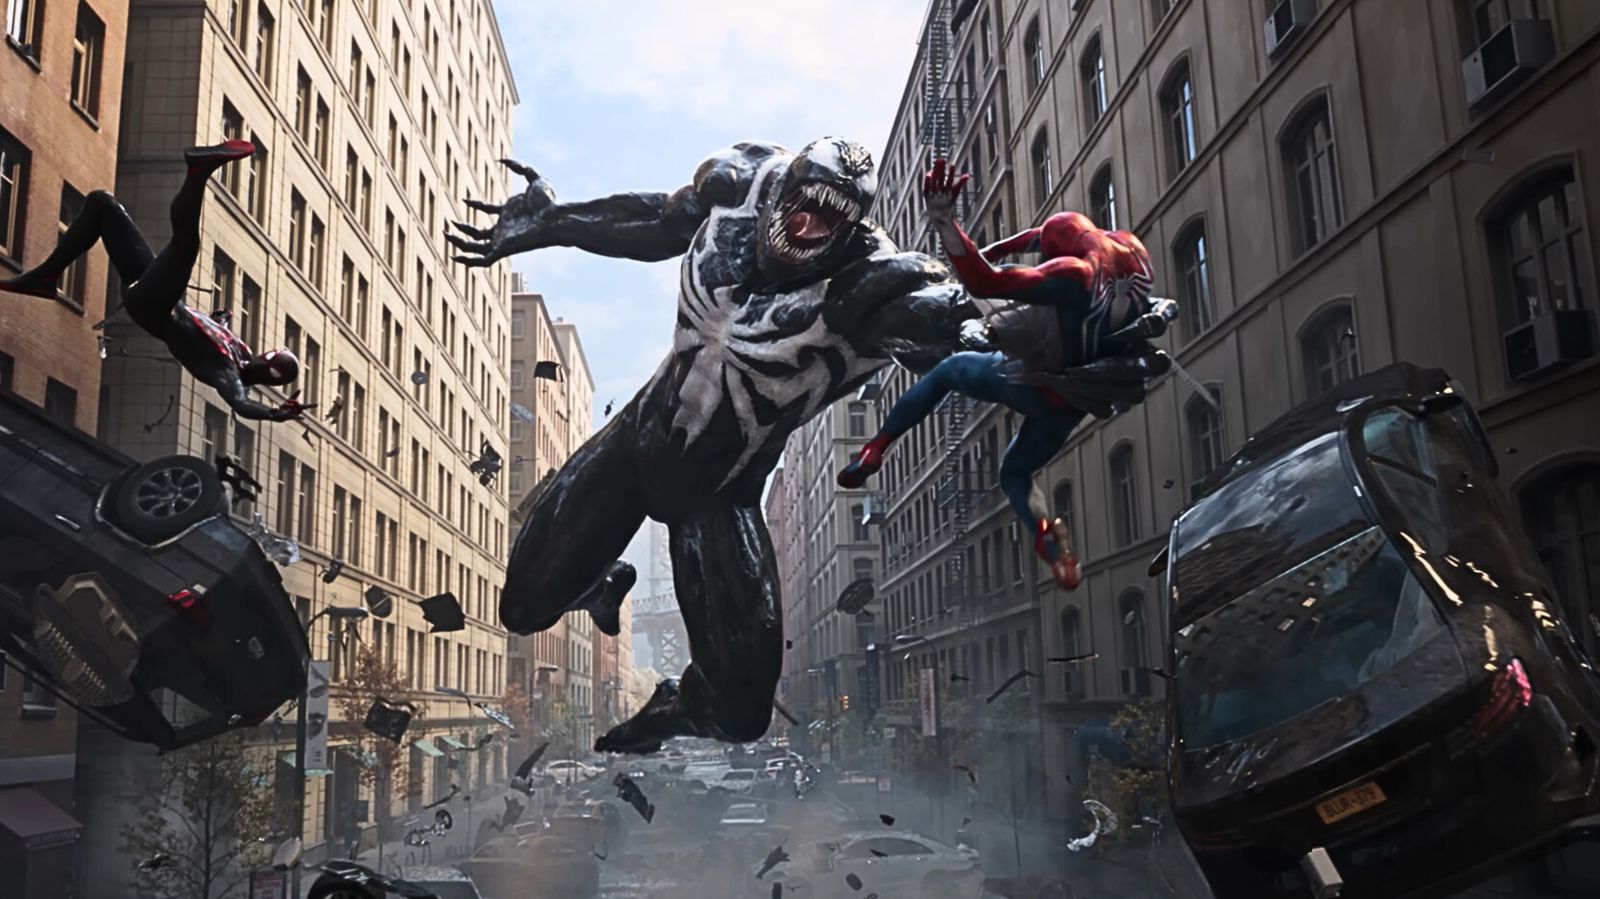 Venom engaged in a battle with Peter and Miles in Spider-Man 2